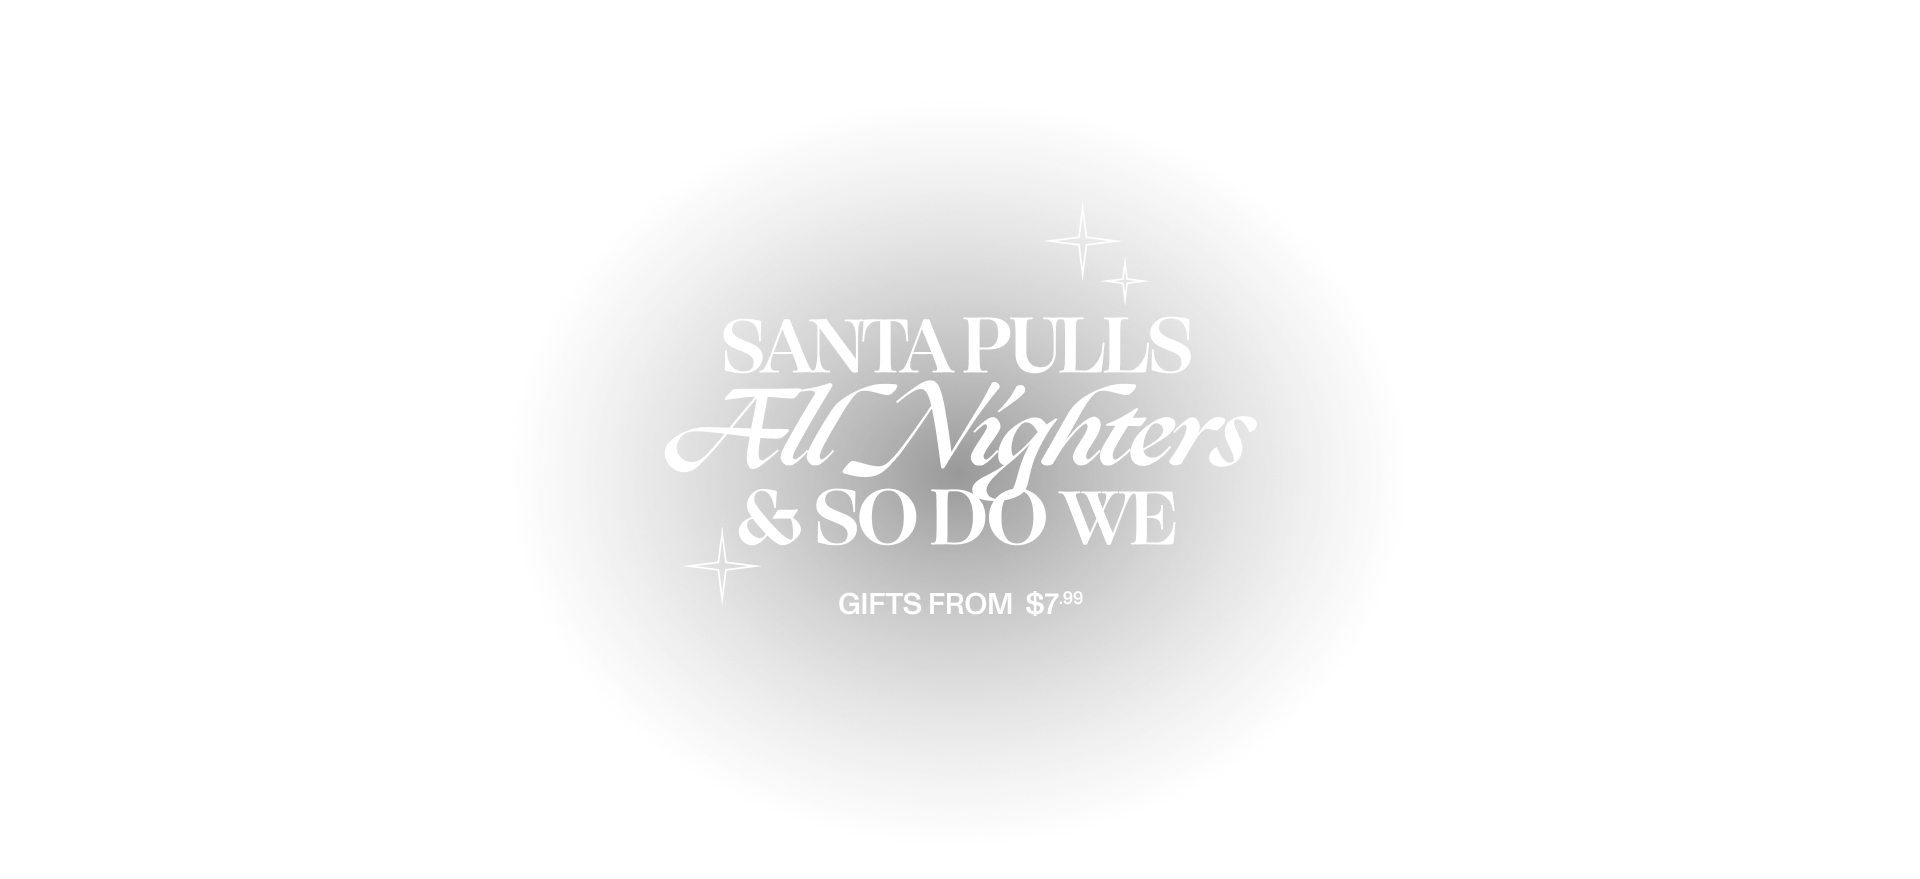 Santa pulls all nighters & So do we. Gifts from $7.99